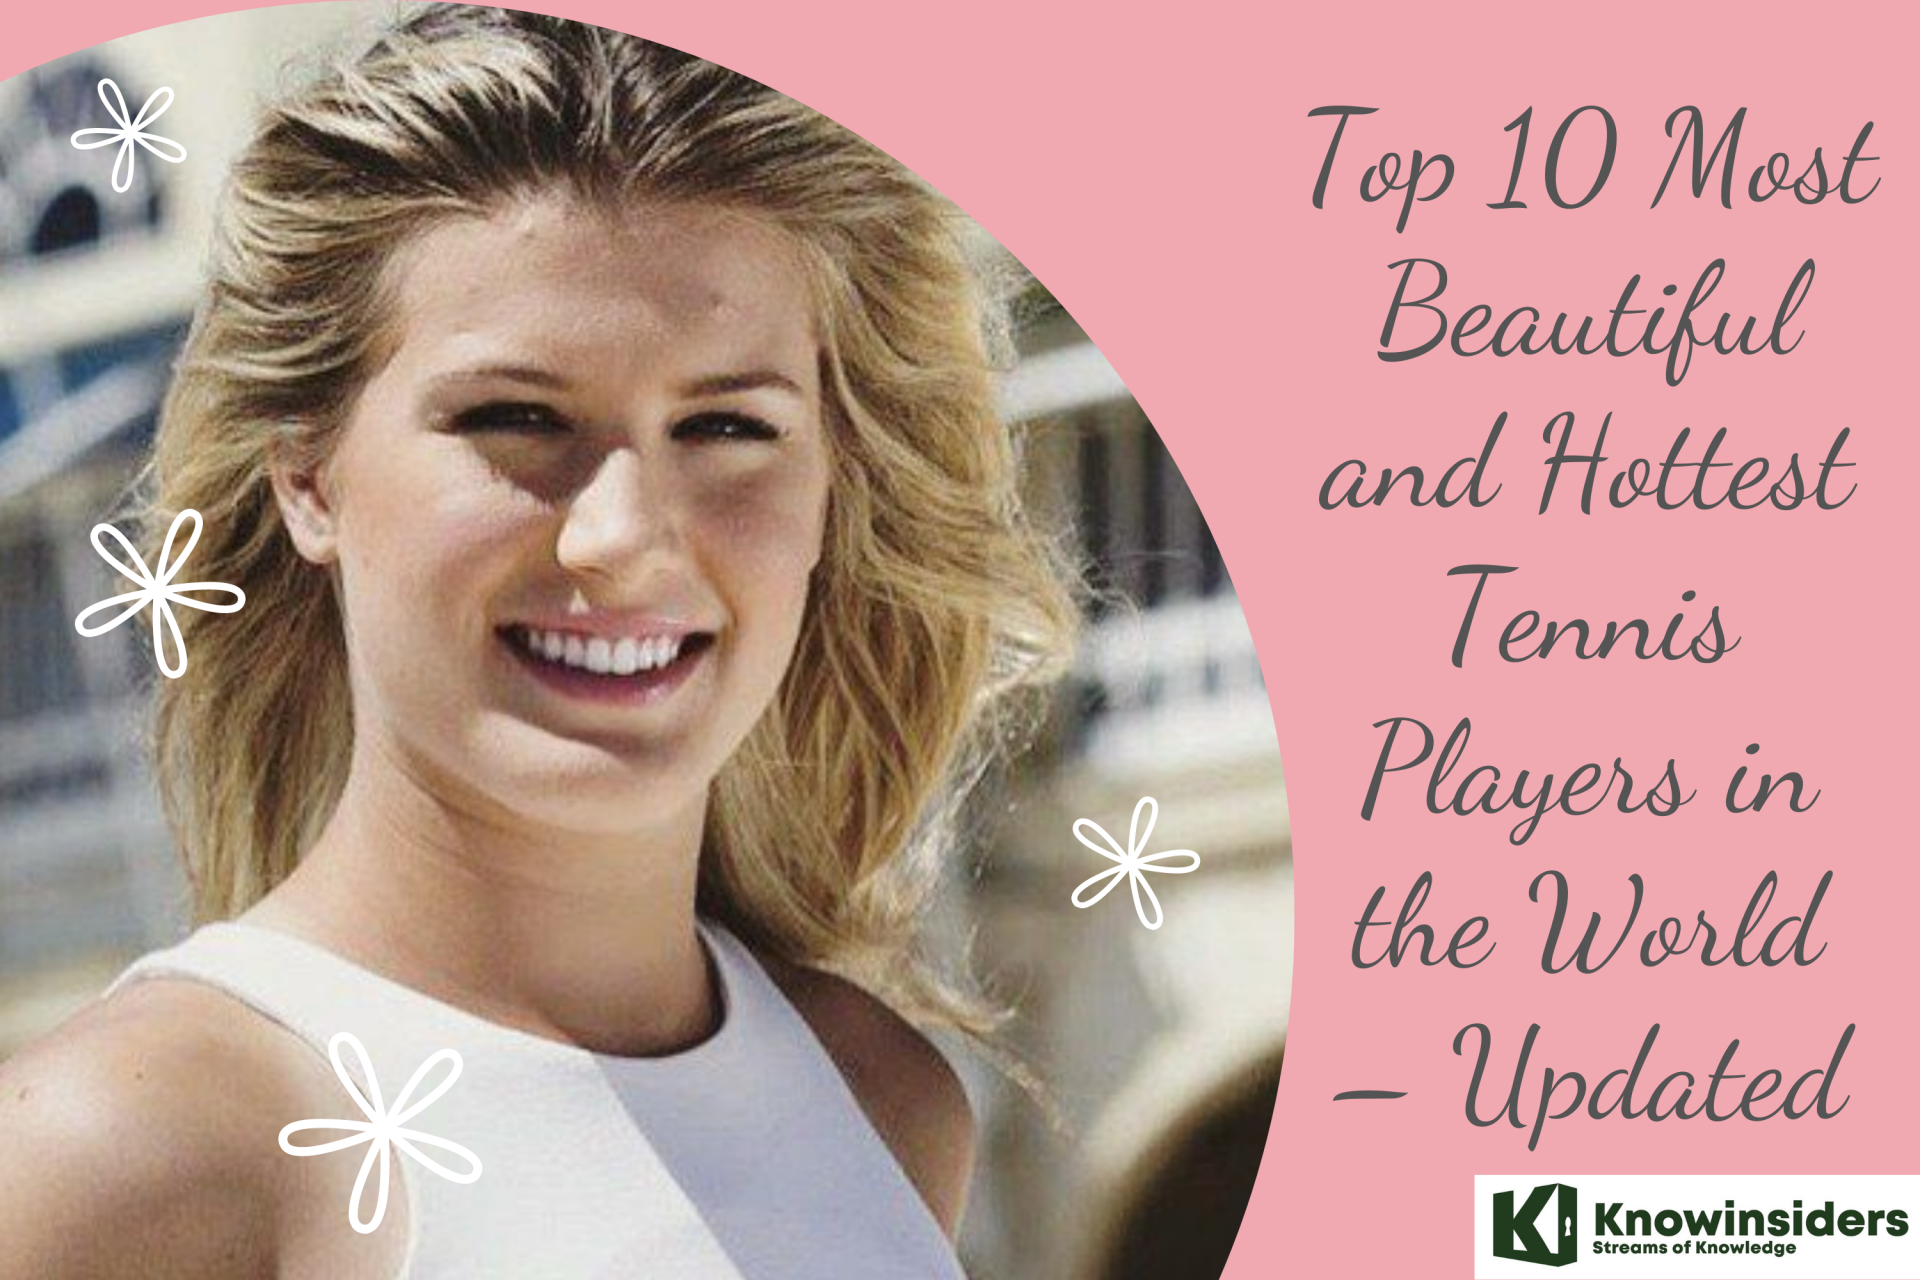 Top 10 Most Beautiful Tennis Players in the World Today